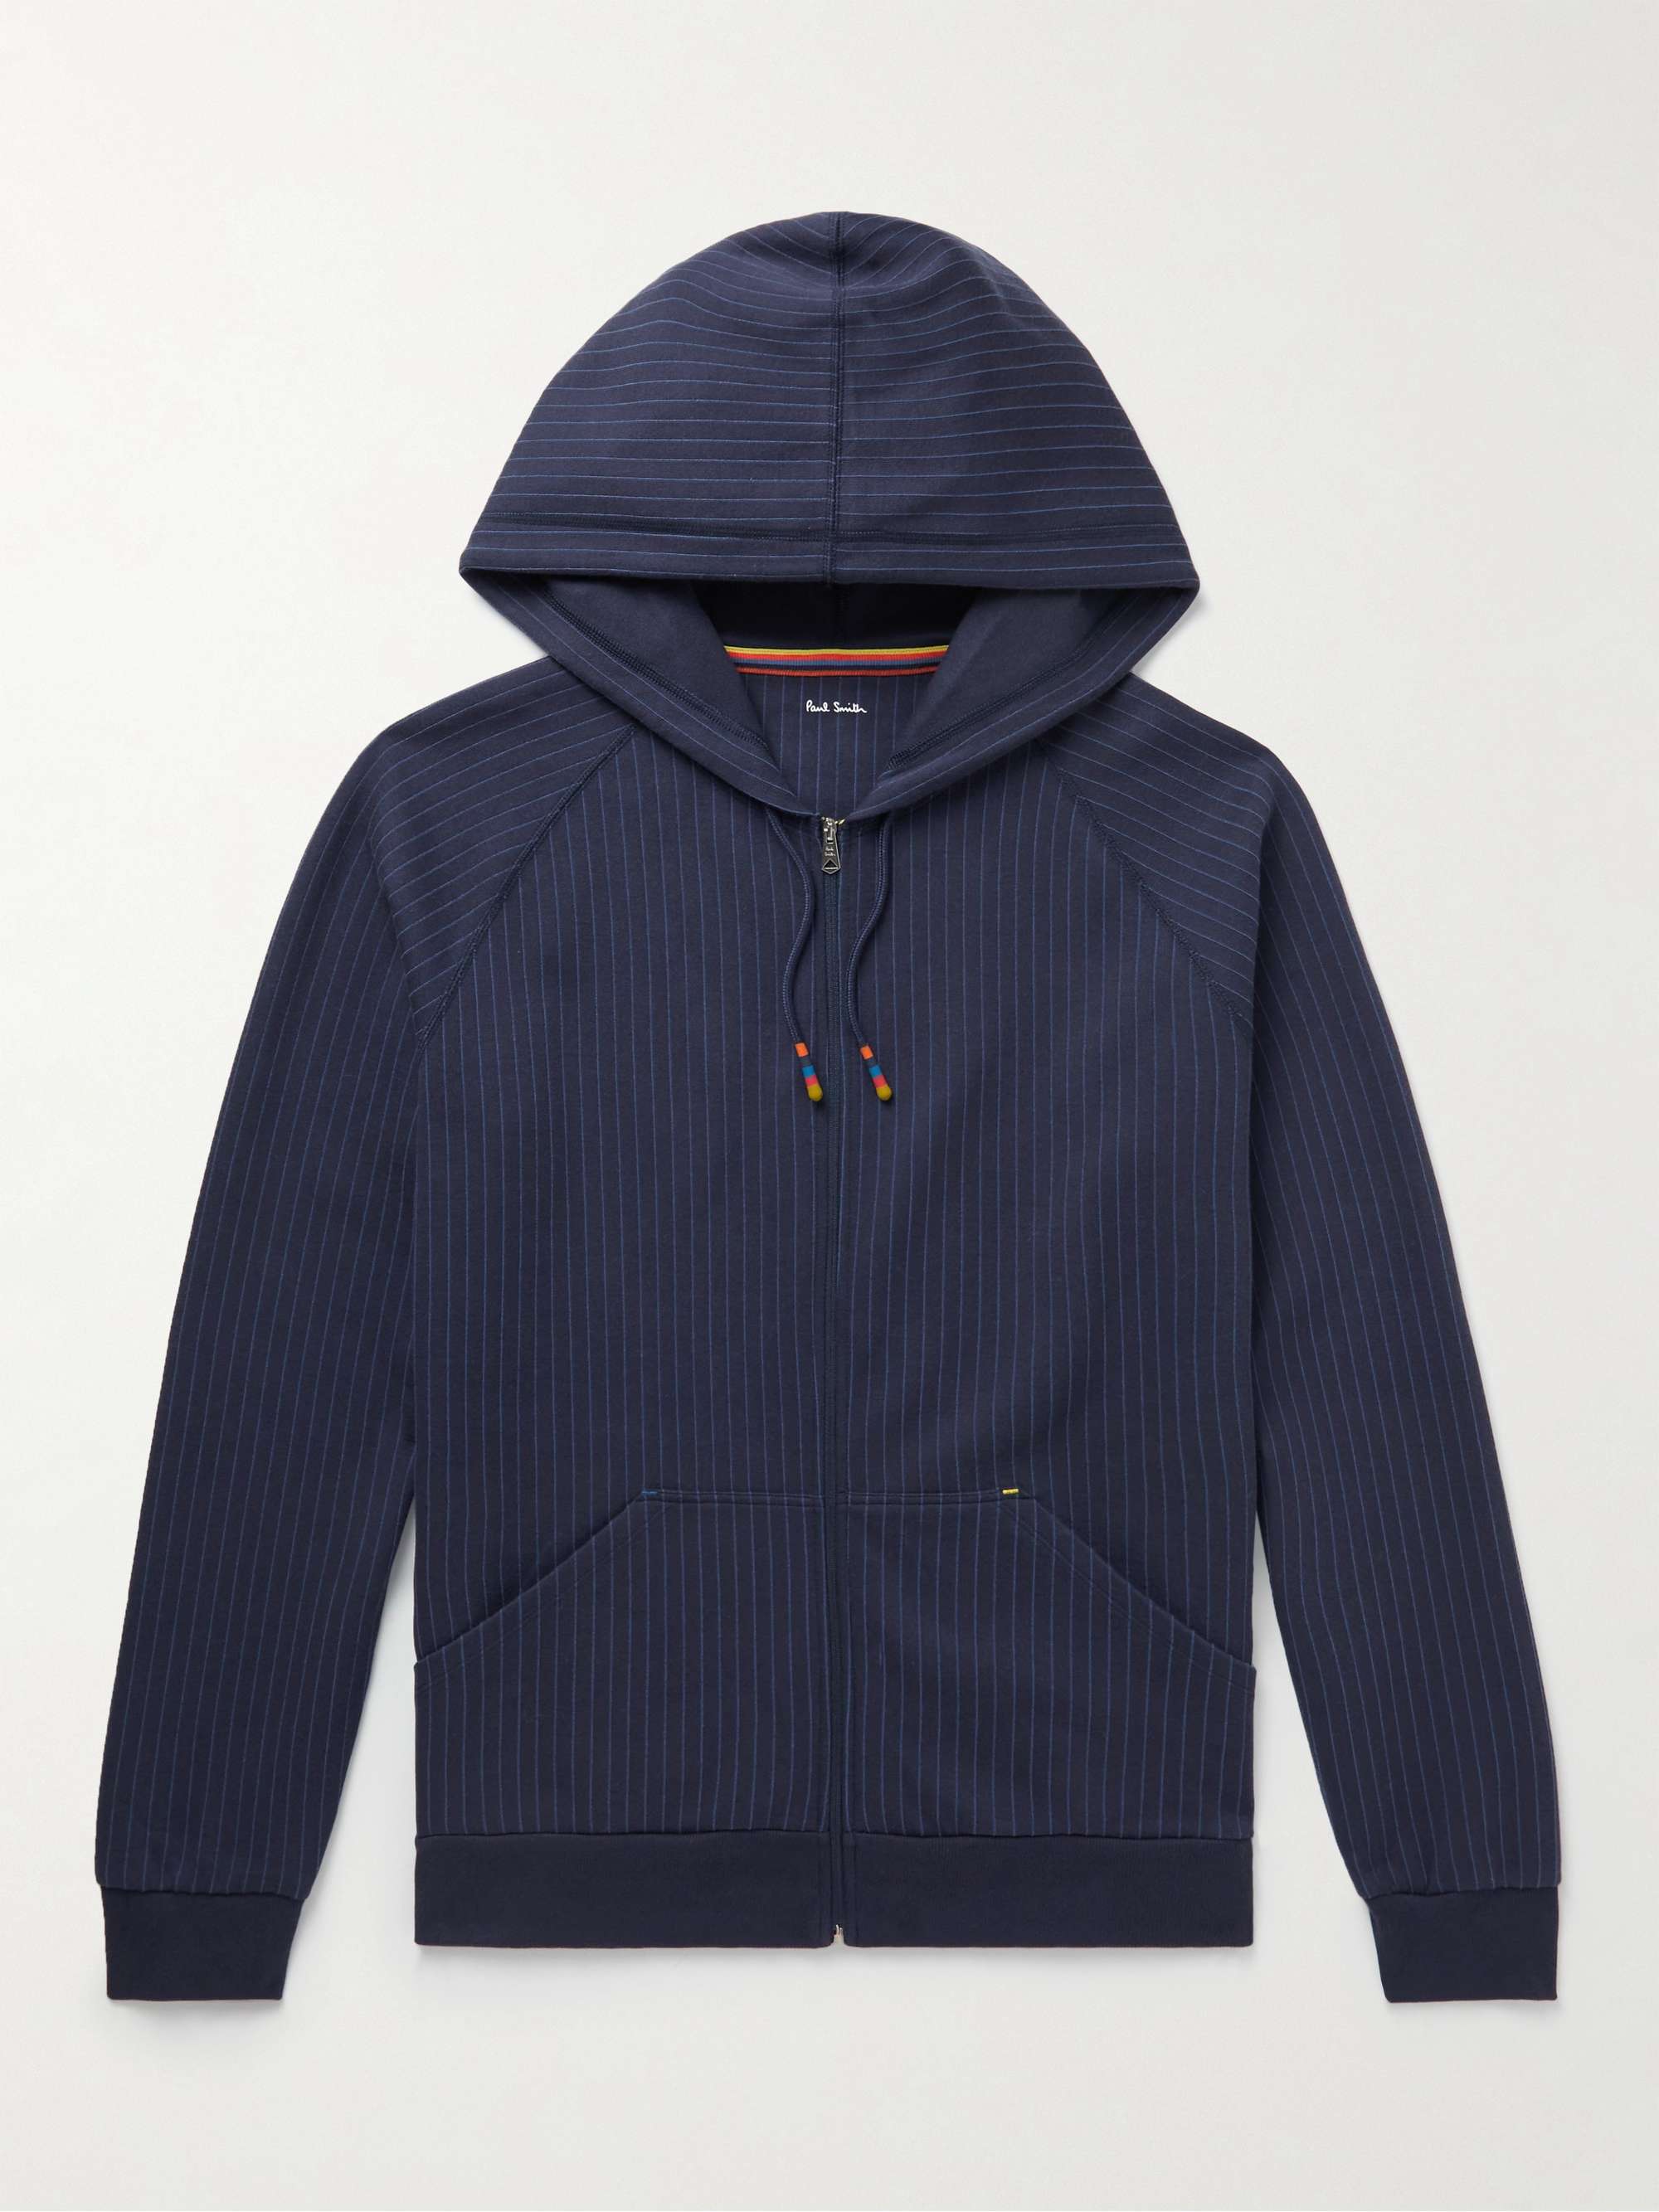 PAUL SMITH Pinstriped Cotton-Blend Jersey Zip-Up Hoodie for Men | MR PORTER